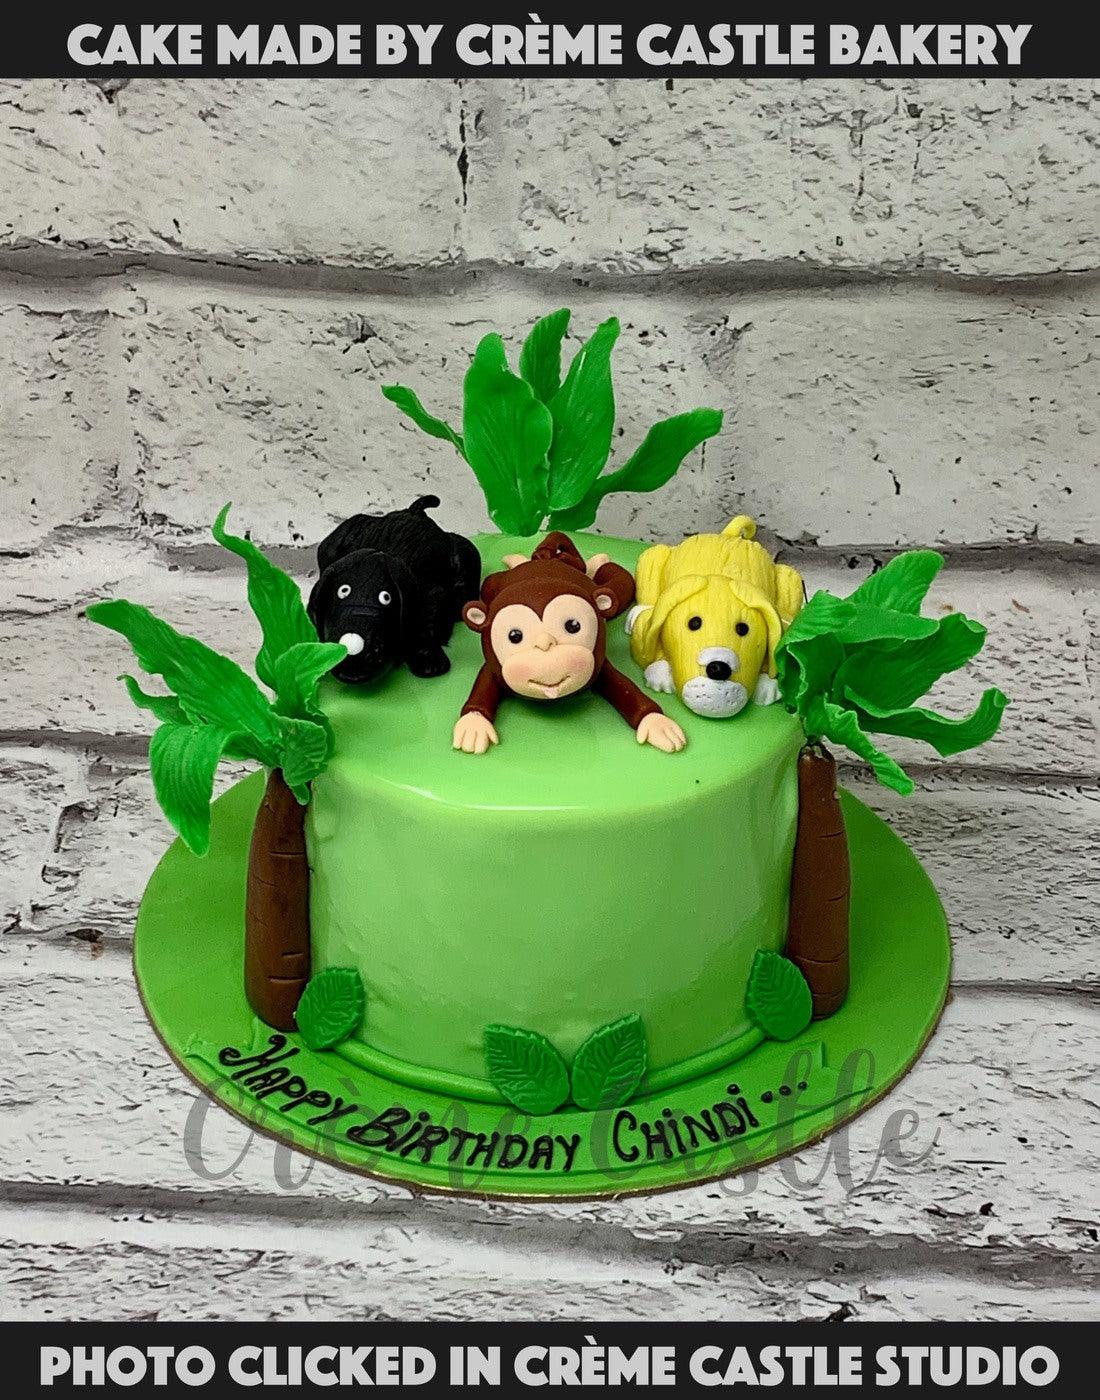 The Grand Jungle Cake | Order Online at Bakers' Fun